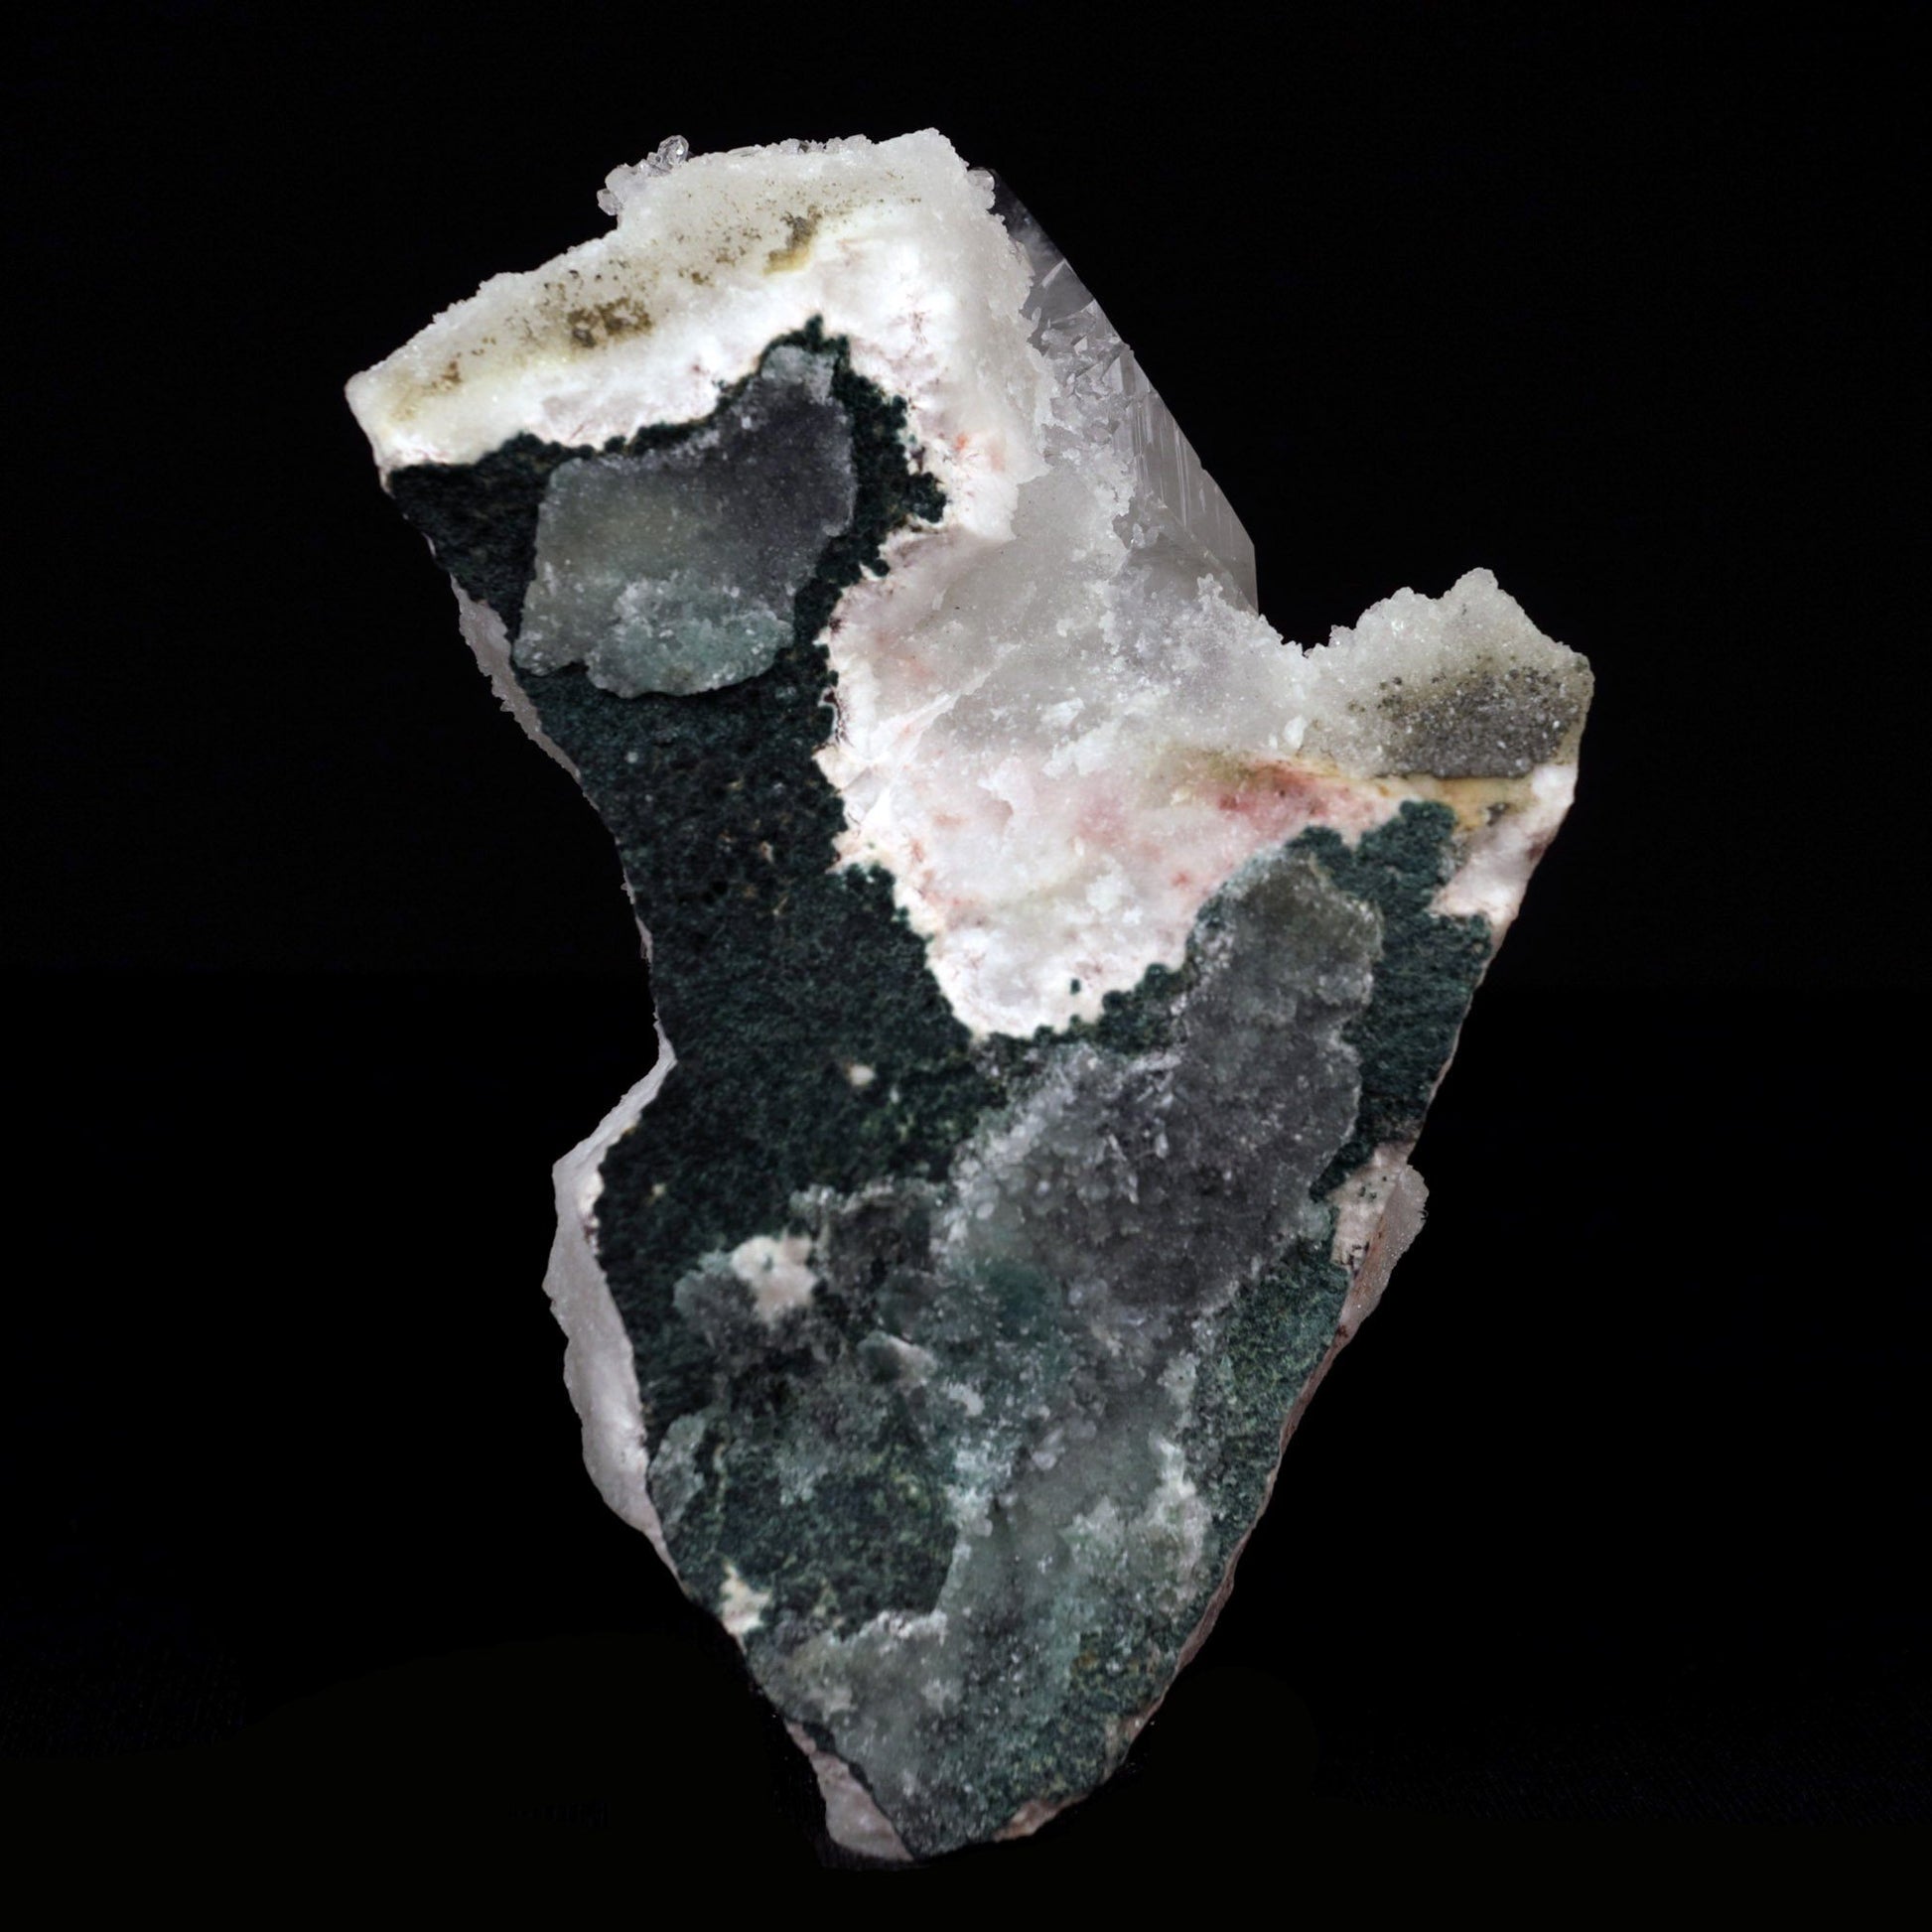 Pointed Apophyllite Crystal on Chalcedony Natural Mineral Specimen # B…  https://www.superbminerals.us/products/pointed-apophyllite-crystal-on-chalcedony-natural-mineral-specimen-b-4120  Features:One big intersecting doubly-terminated crystal of colorless Apophyllite perched on small plate of white chalcedony Microcrystals. The tip of the smaller crystal is cleaved with a clean surface. Primary Mineral(s): ApophylliteSecondary Mineral(s): StilbiteMatrix: N/A10 cm x 6 cm 150 GmsLocality: Jalgaon